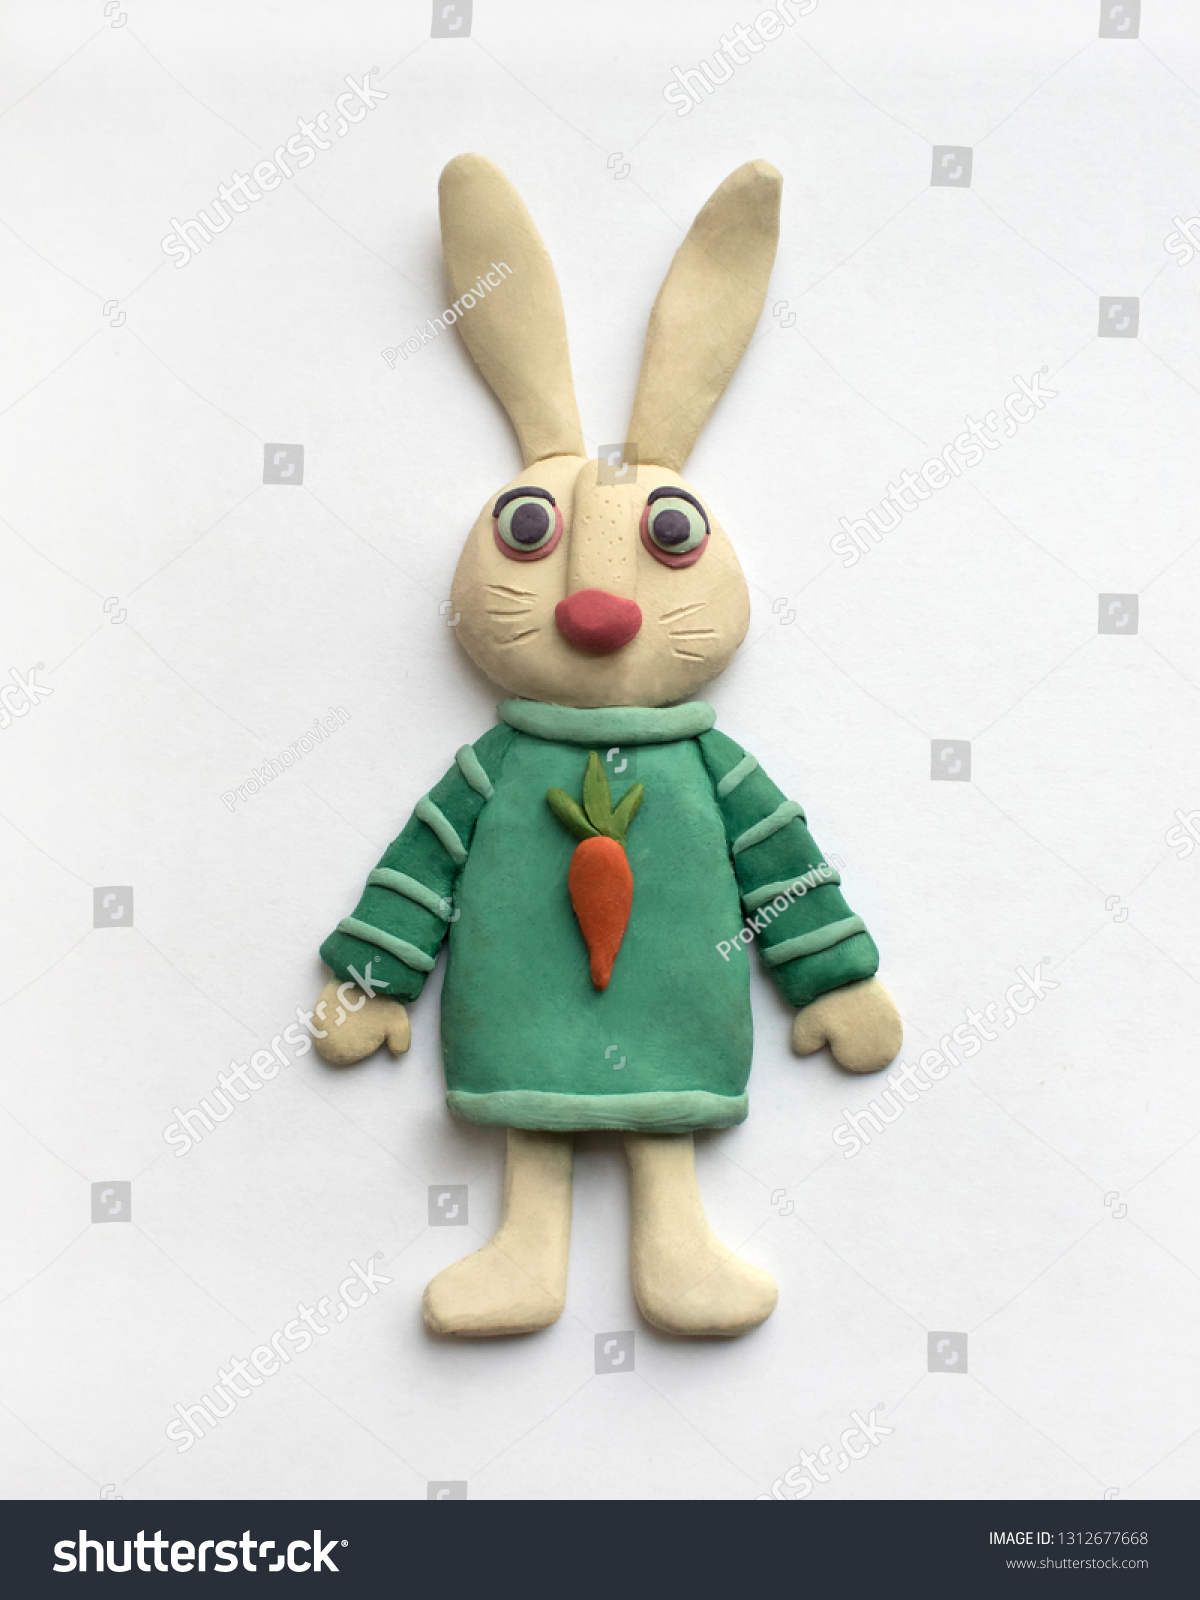 Cute hare in a blue dress. Plasticine character on a white background #1312677668